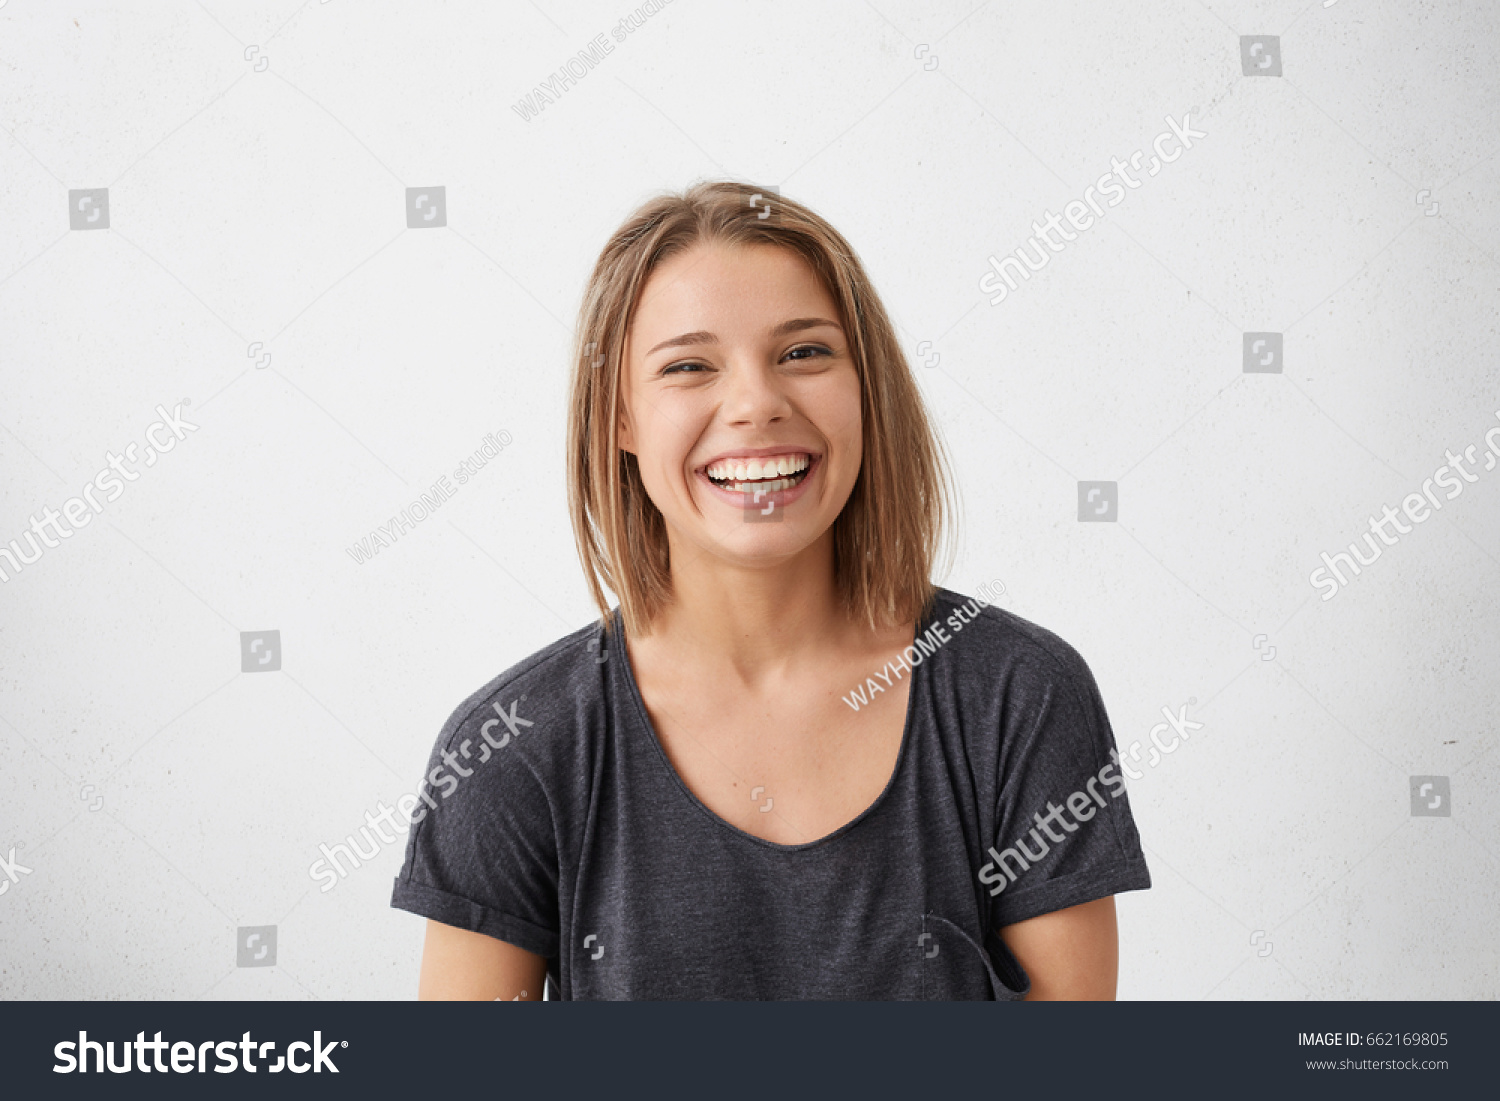 Attractive woman with short fair hair being very glad smiling with broad smile showing her perfect teeth having fun indoors. Joyful excited cheery femlae rejoicing after being proposed to marry #662169805